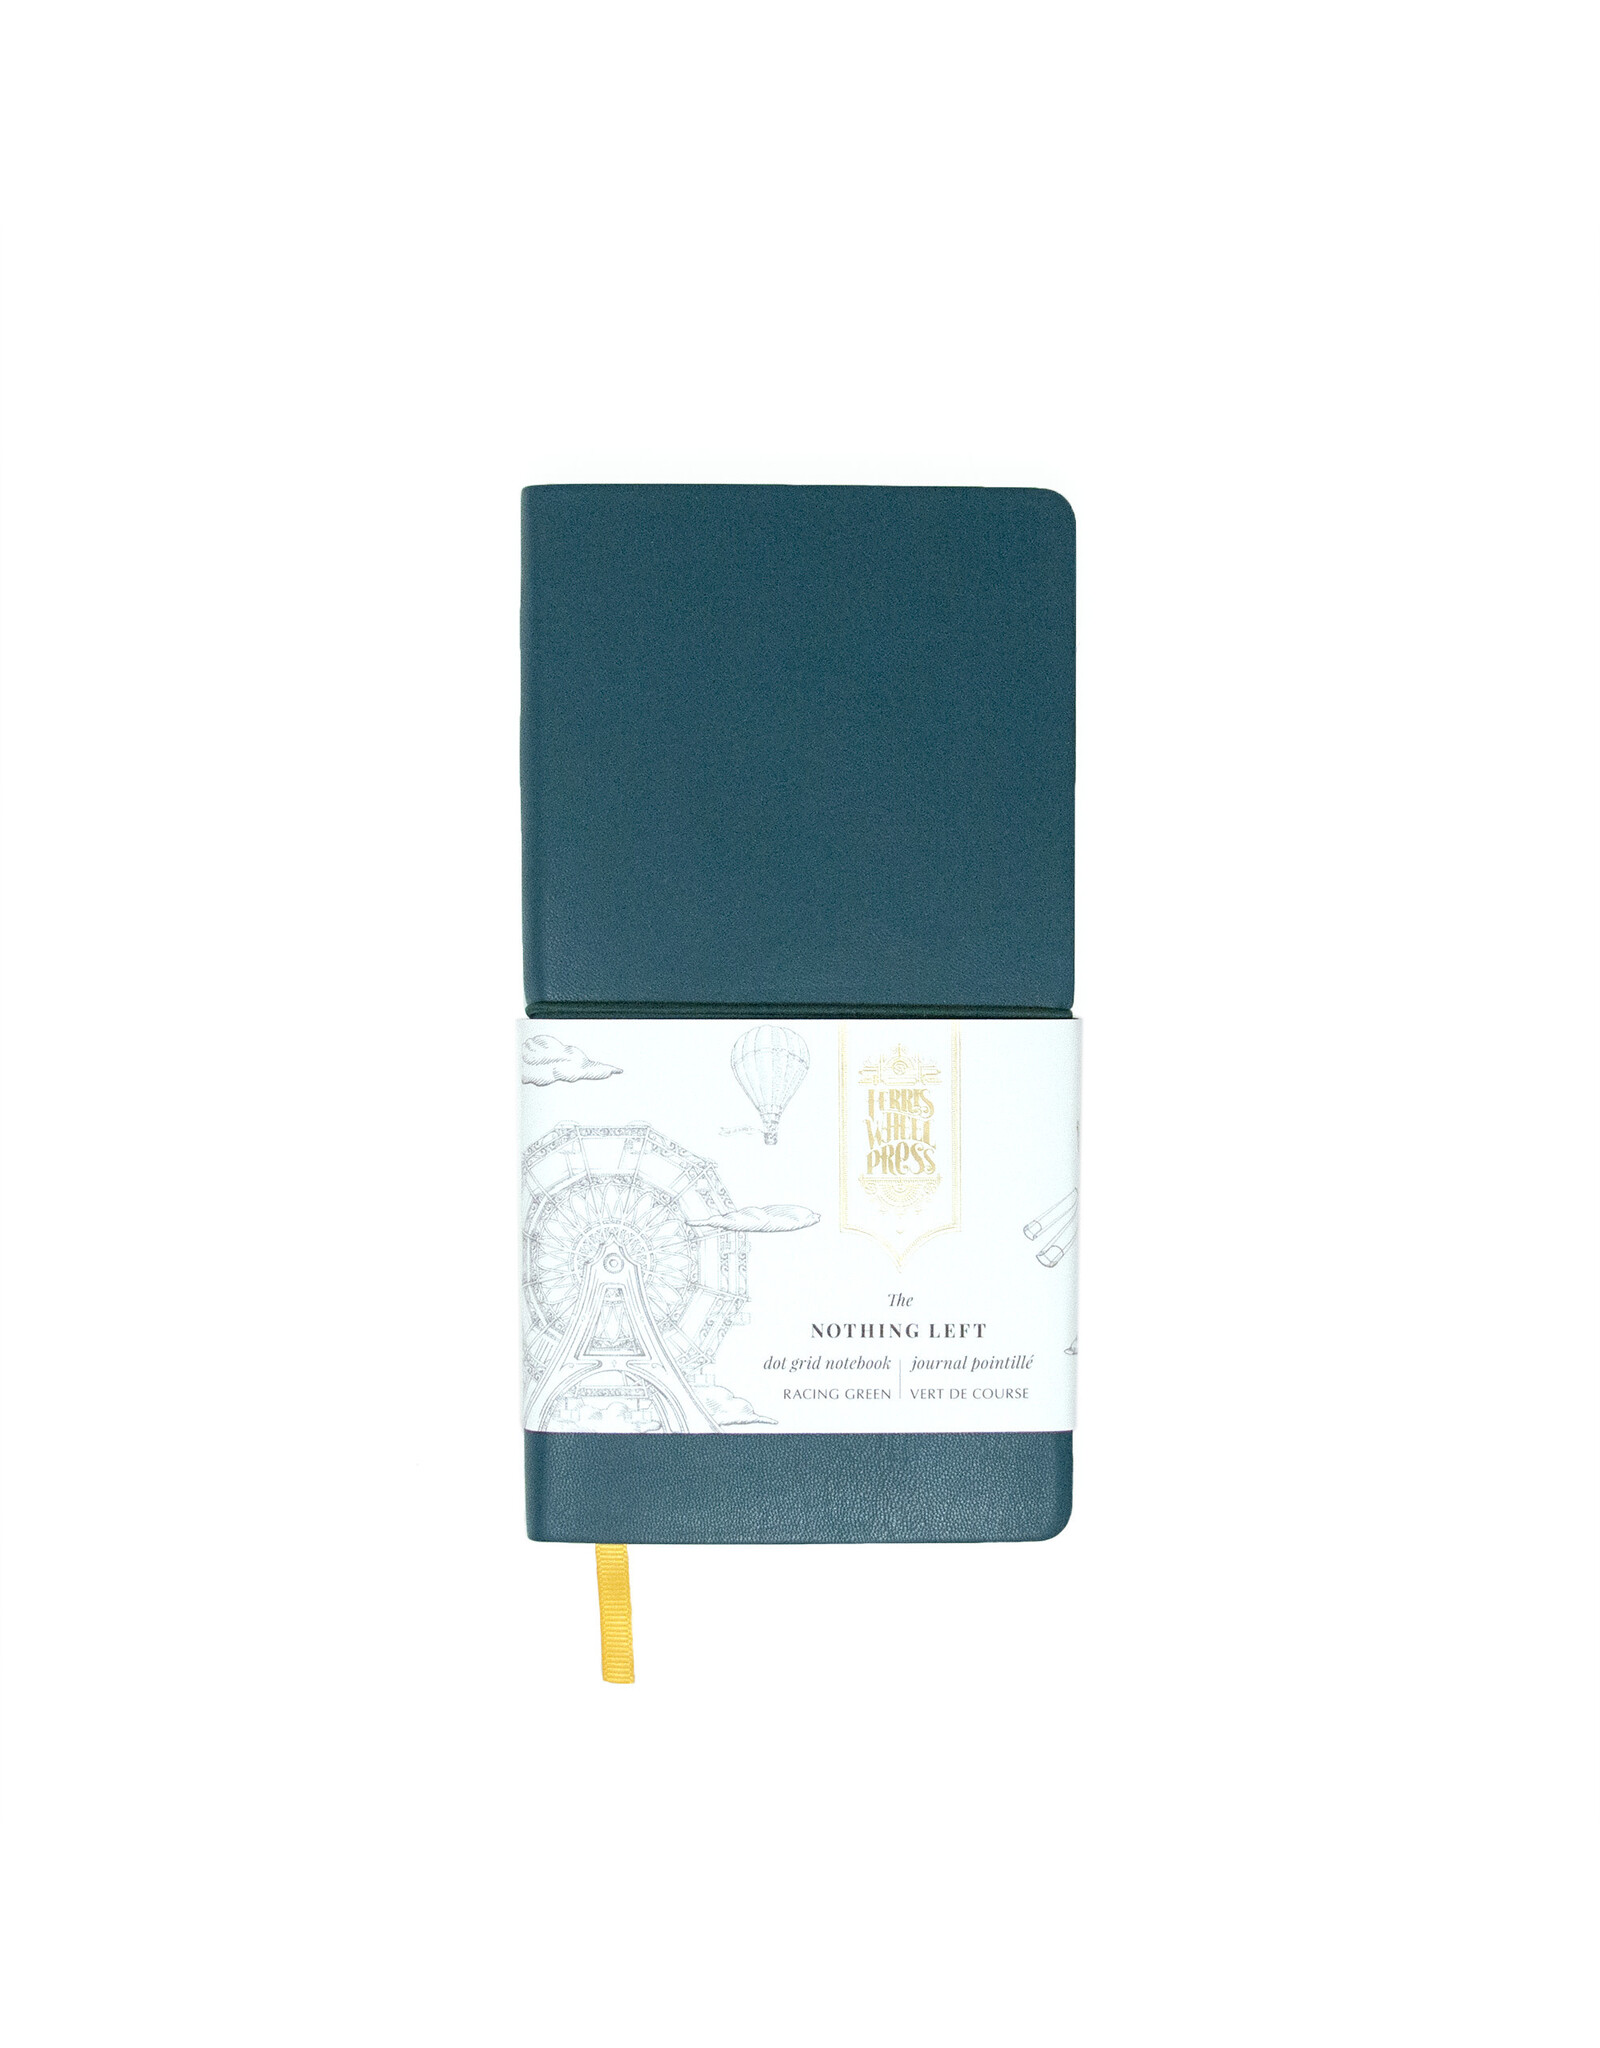 Ferris Wheel Press Nothing Left Fether Notebook Racing Green 8.5" x 4"